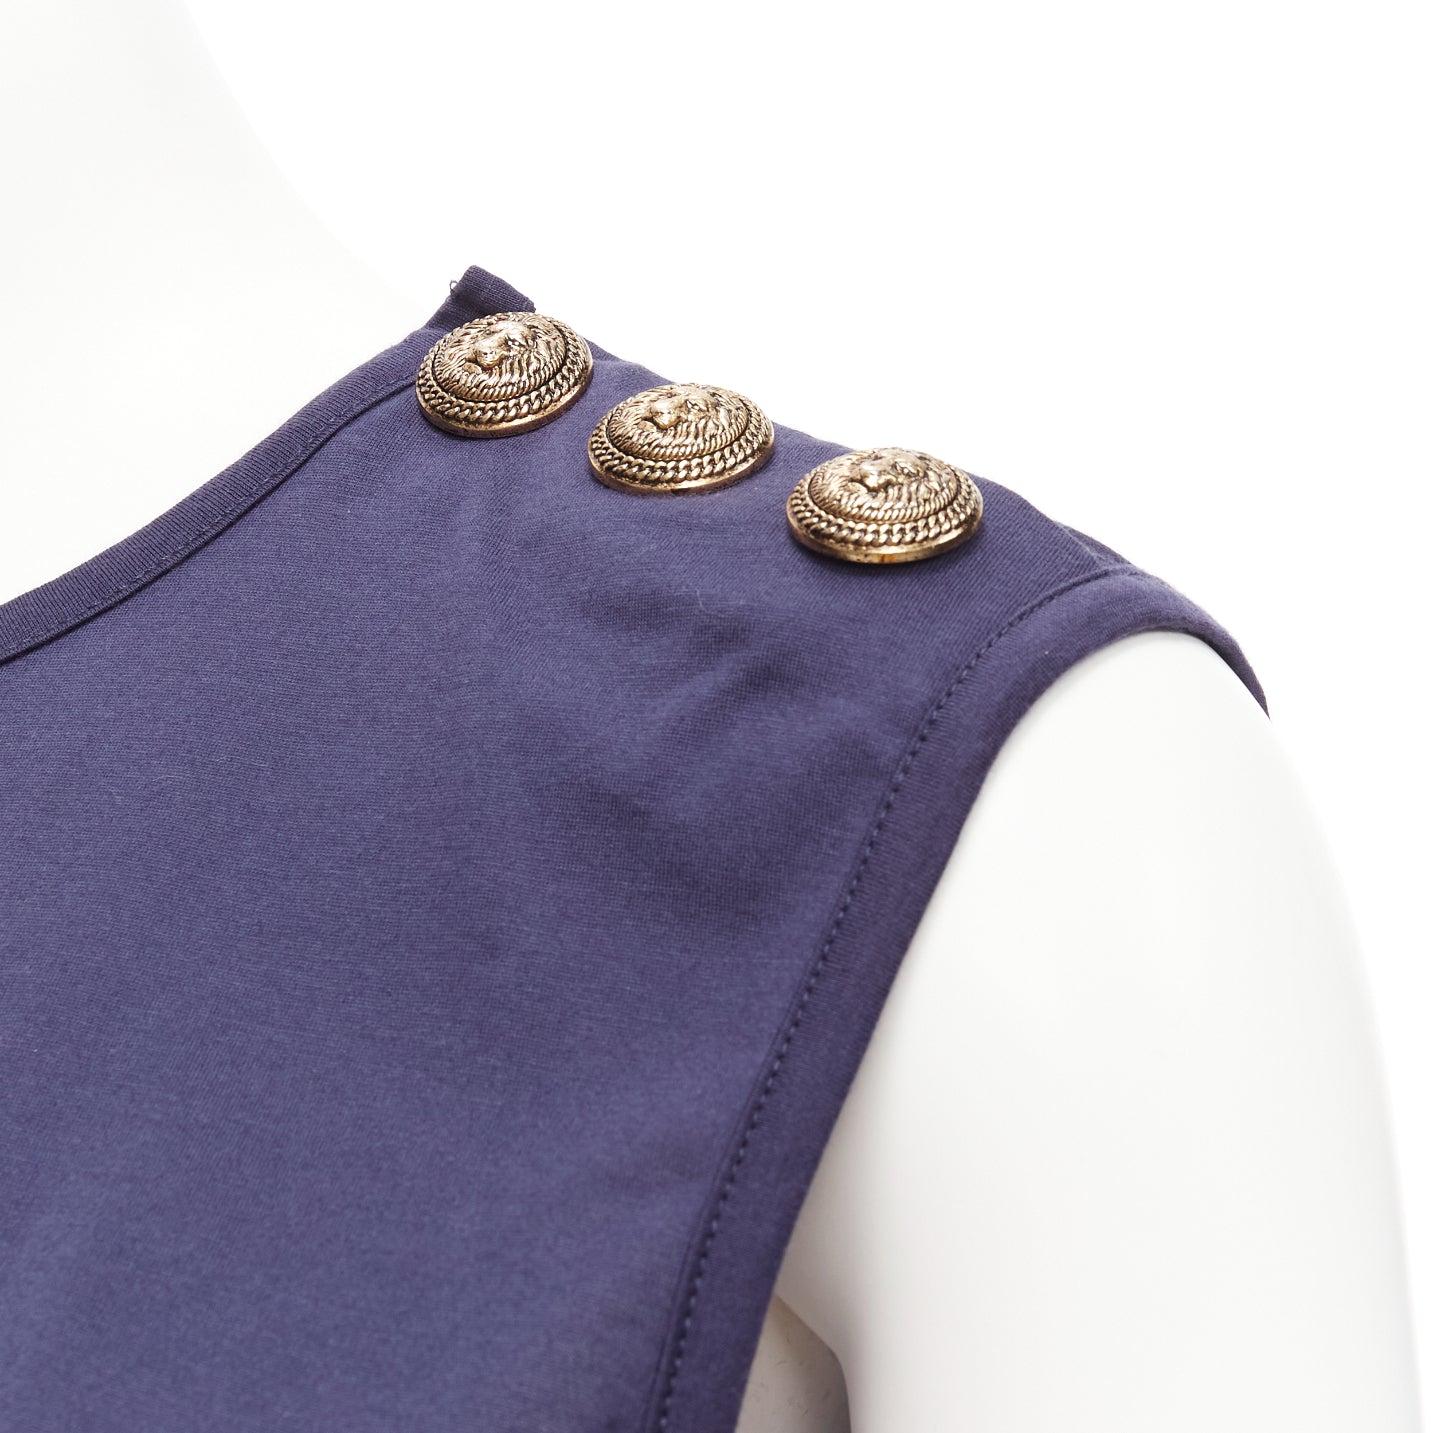 BALMAIN navy gold foil logo military button shoulder tank top FR34 XS
Reference: AAWC/A00764
Brand: Balmain
Designer: Olivier Rousteing
Material: Cotton
Color: Navy, Gold
Pattern: Solid
Closure: Snap Buttons
Extra Details: Snap buttons at